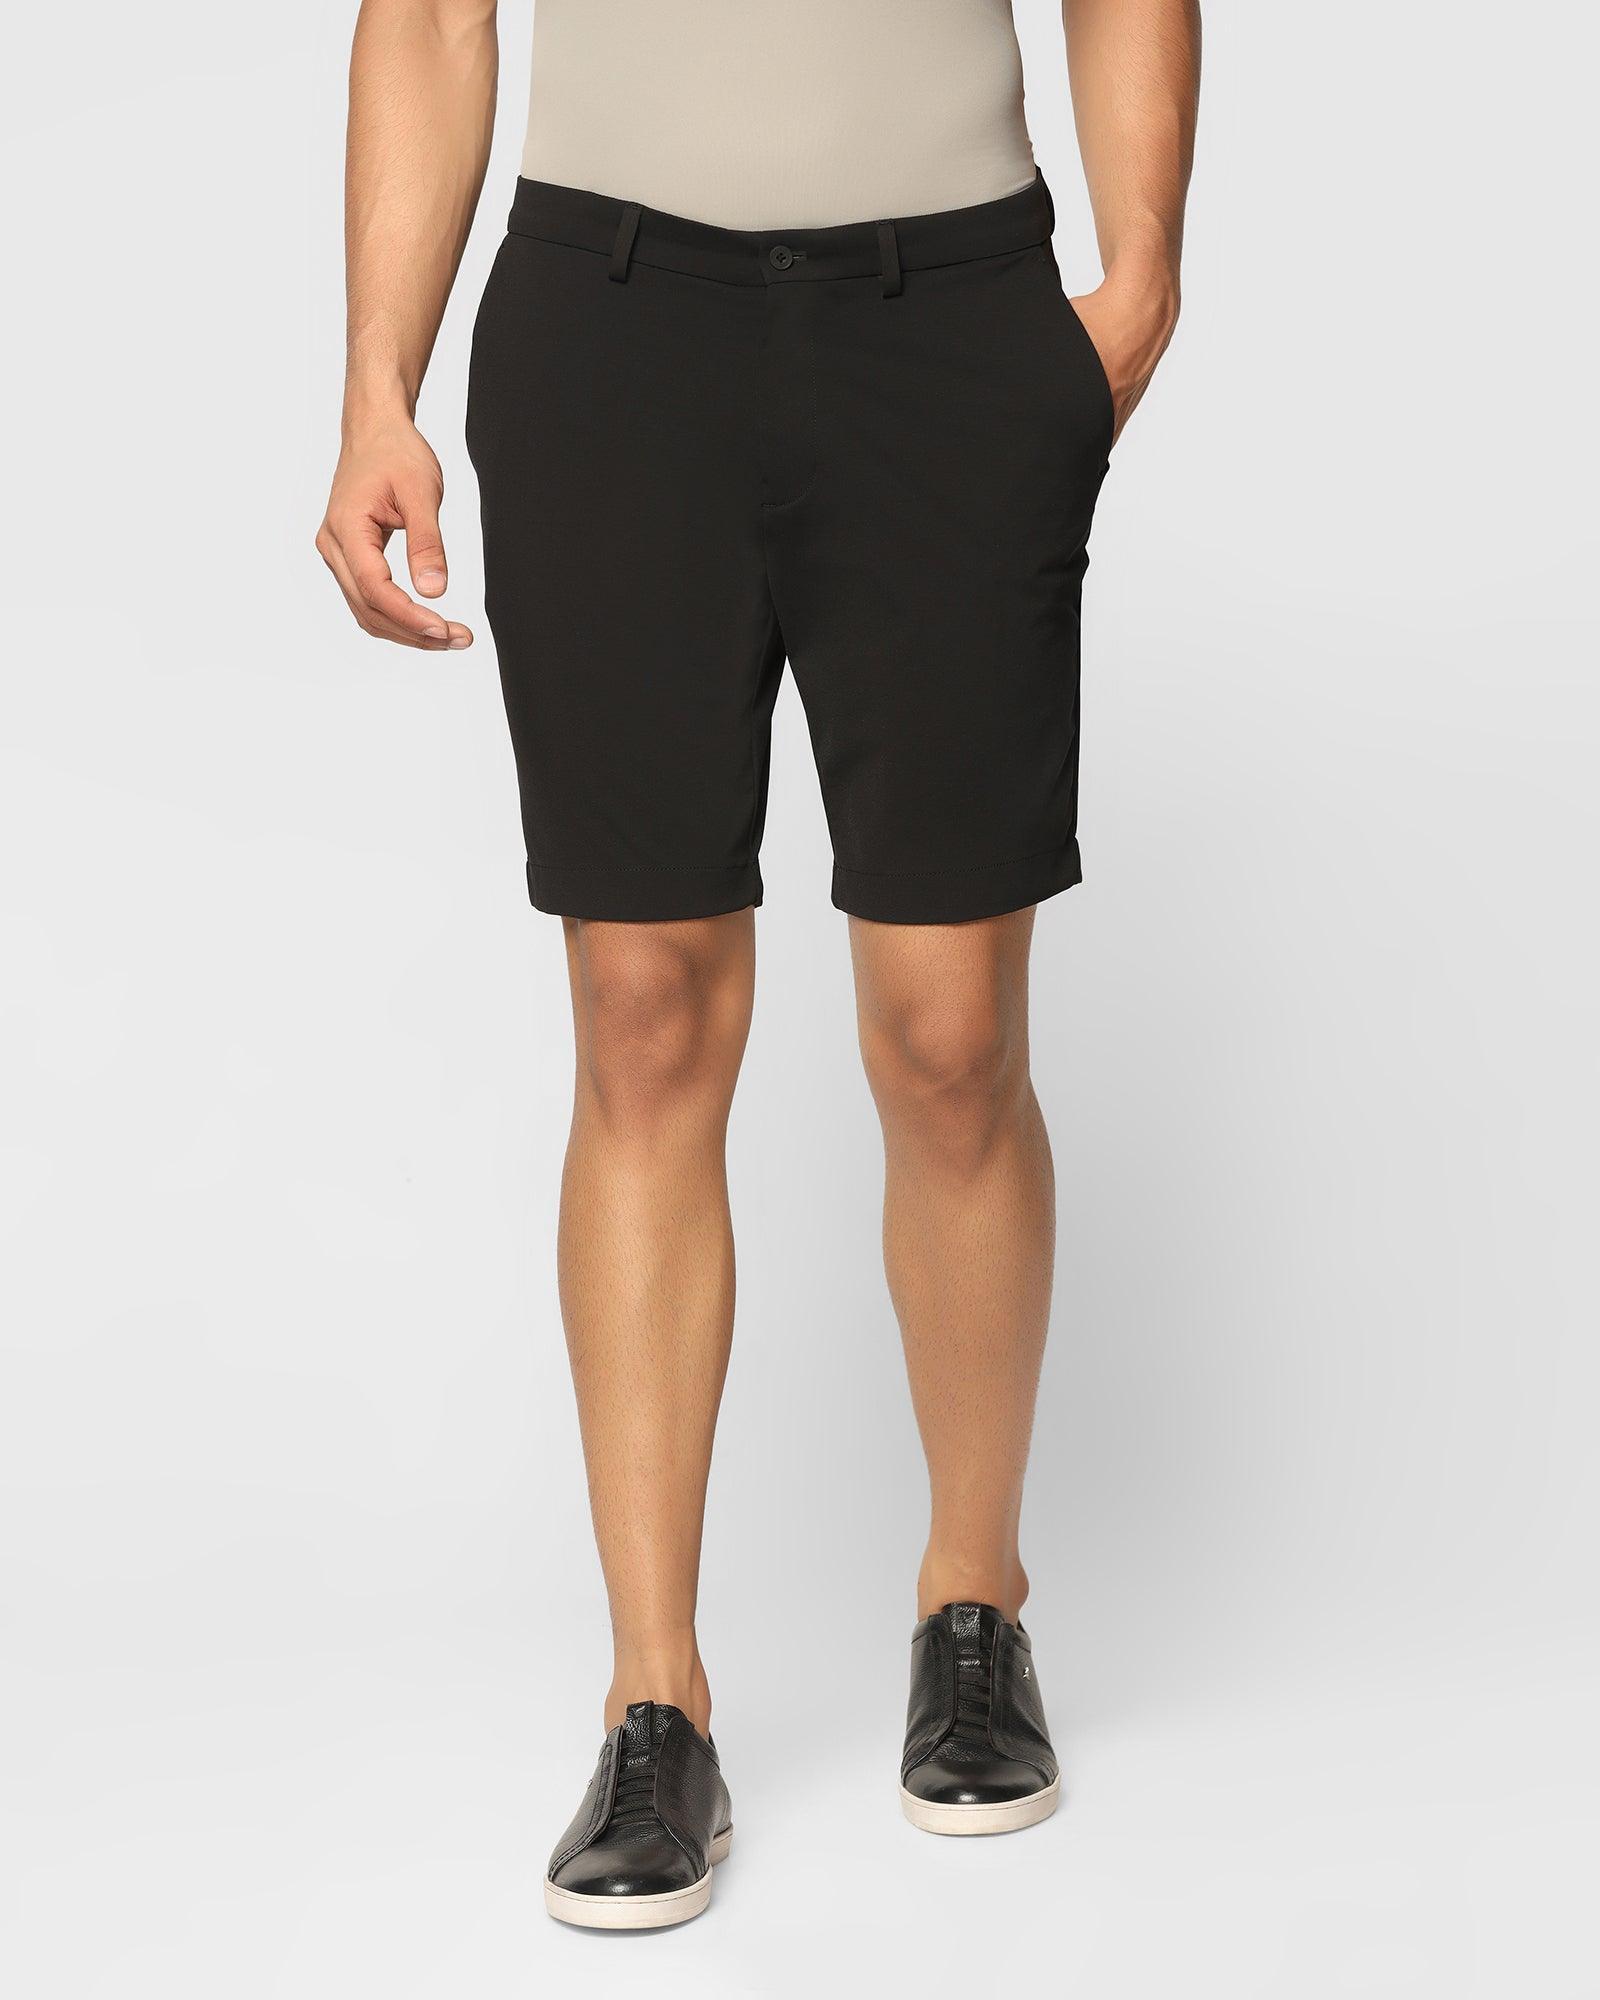 techpro-casual-black-solid-shorts---serry